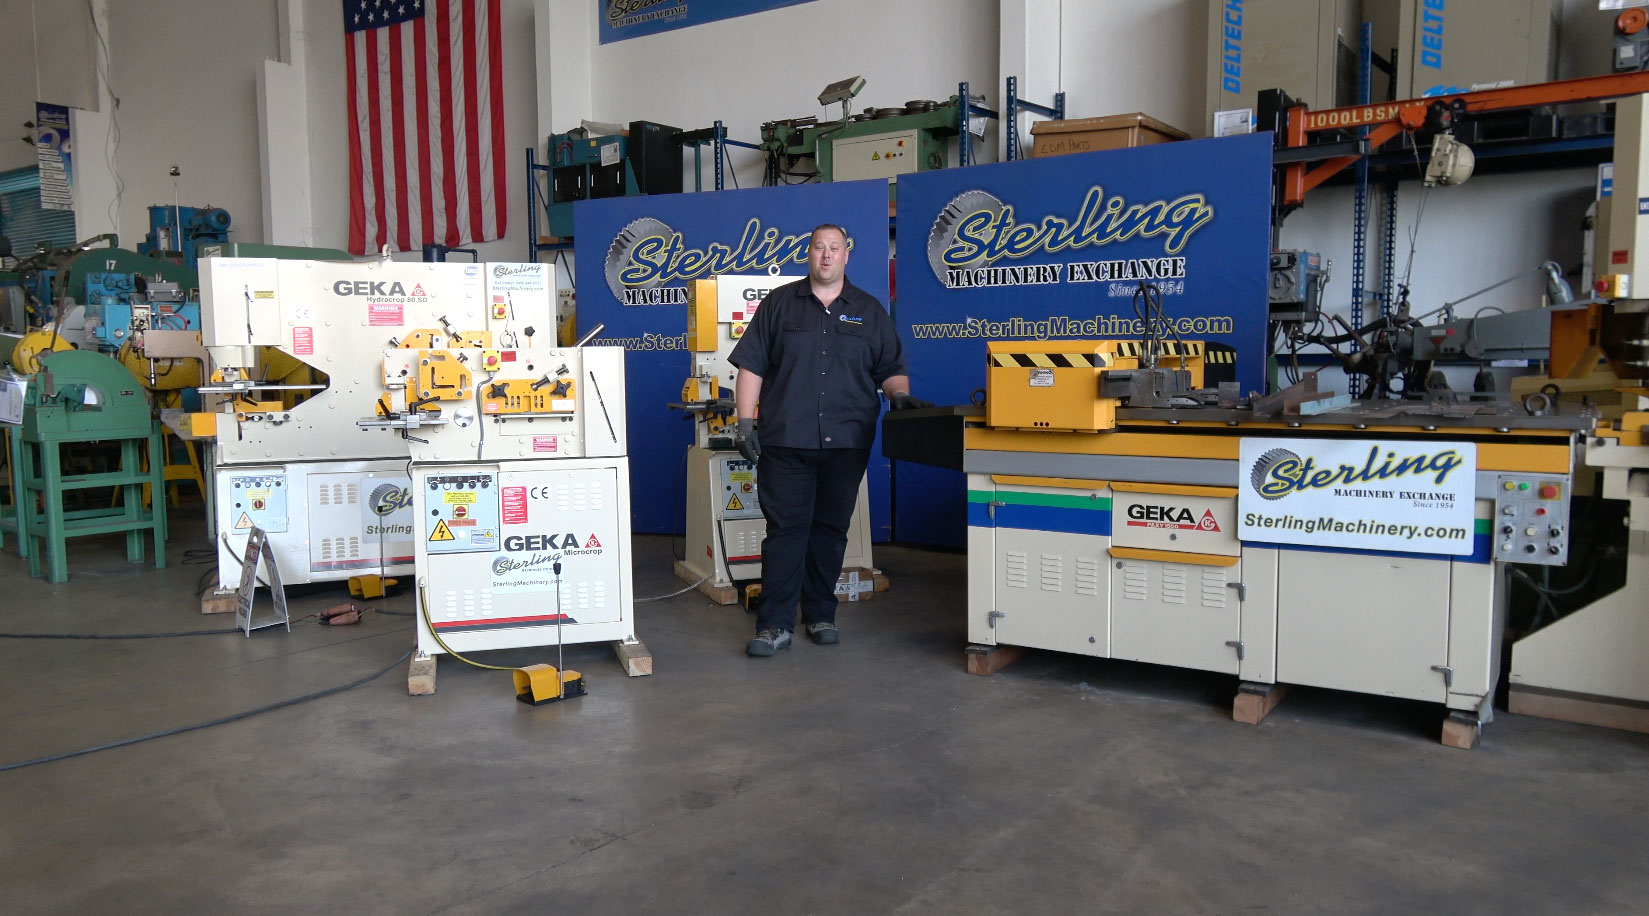 Geka-40 Ton Brand New Geka Hydraulic Ironworker, Mdl. Microcrop 36, Quick Change Punch Holder, Support & Miter Table for Plate Shear, Machined Punch Gauging Table with X & Y Scales and Backstop, 40" Calibrated Electric Length Gauge, Round Punch & Die Starter S-01